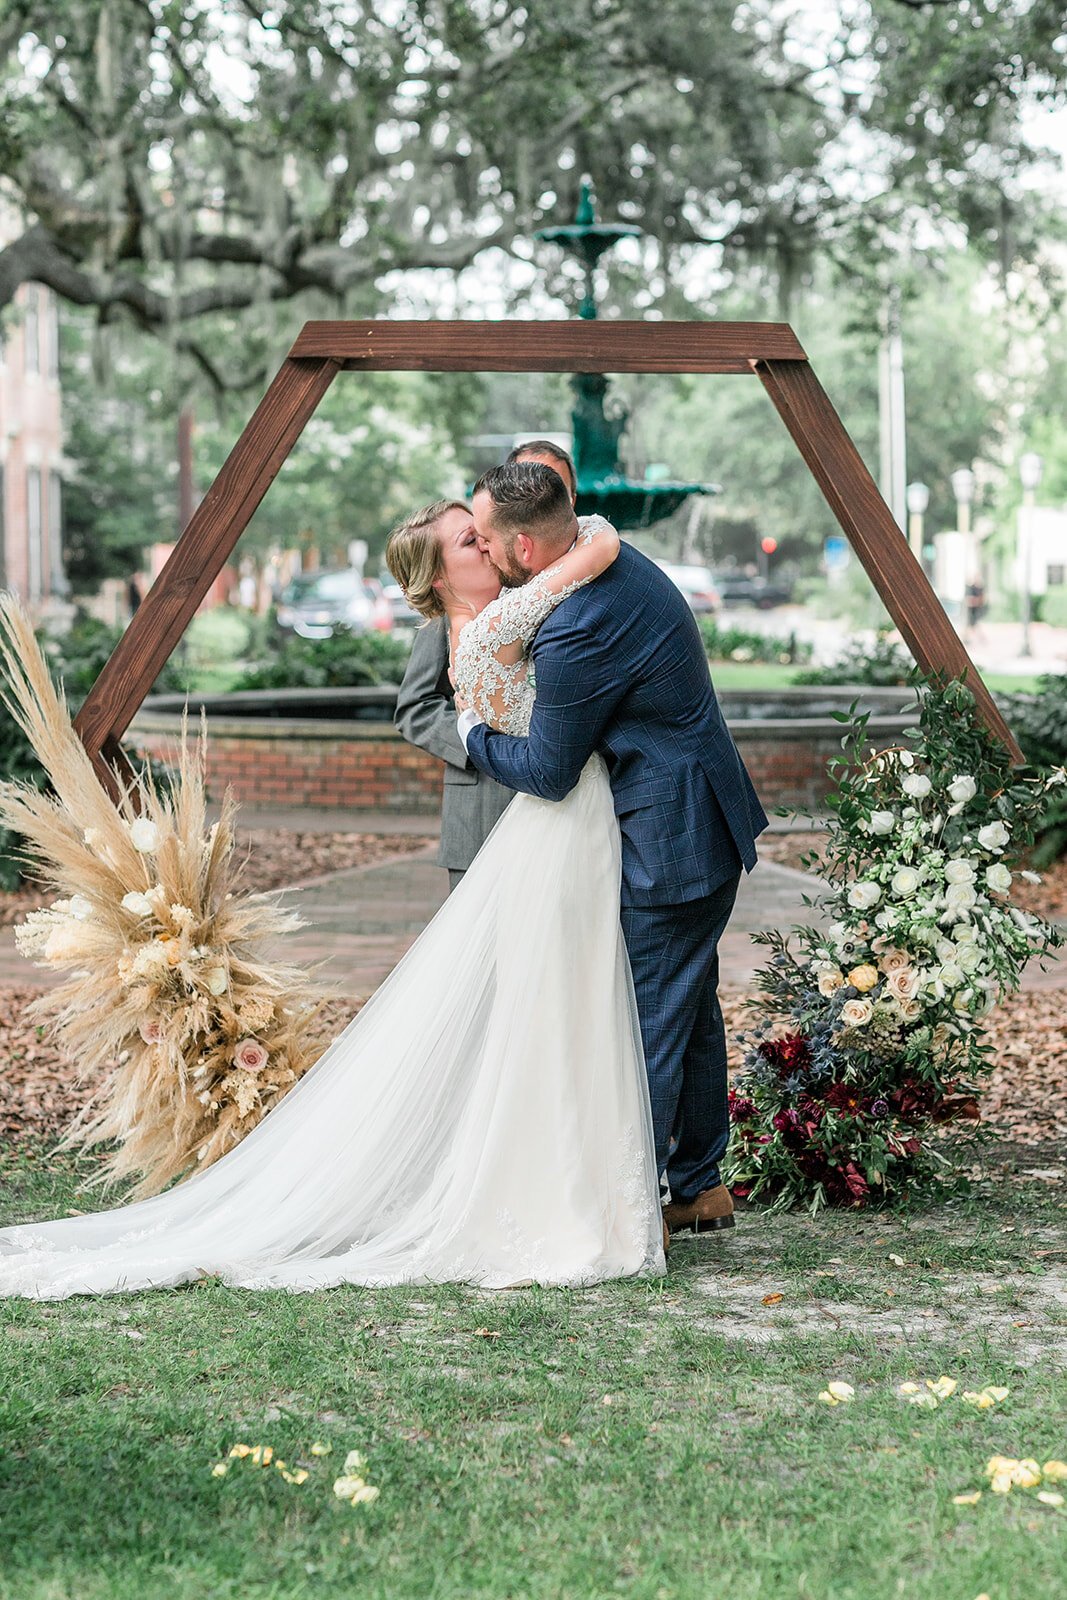 ivory-and-beau-florals-spring-and-stephen-wedding-flowers-wedding-florals-wedding-florist-savannah-florist-savannah-wedding-southern-wedding-floral-design-real-wedding-RLP-Ceremony91.jpg